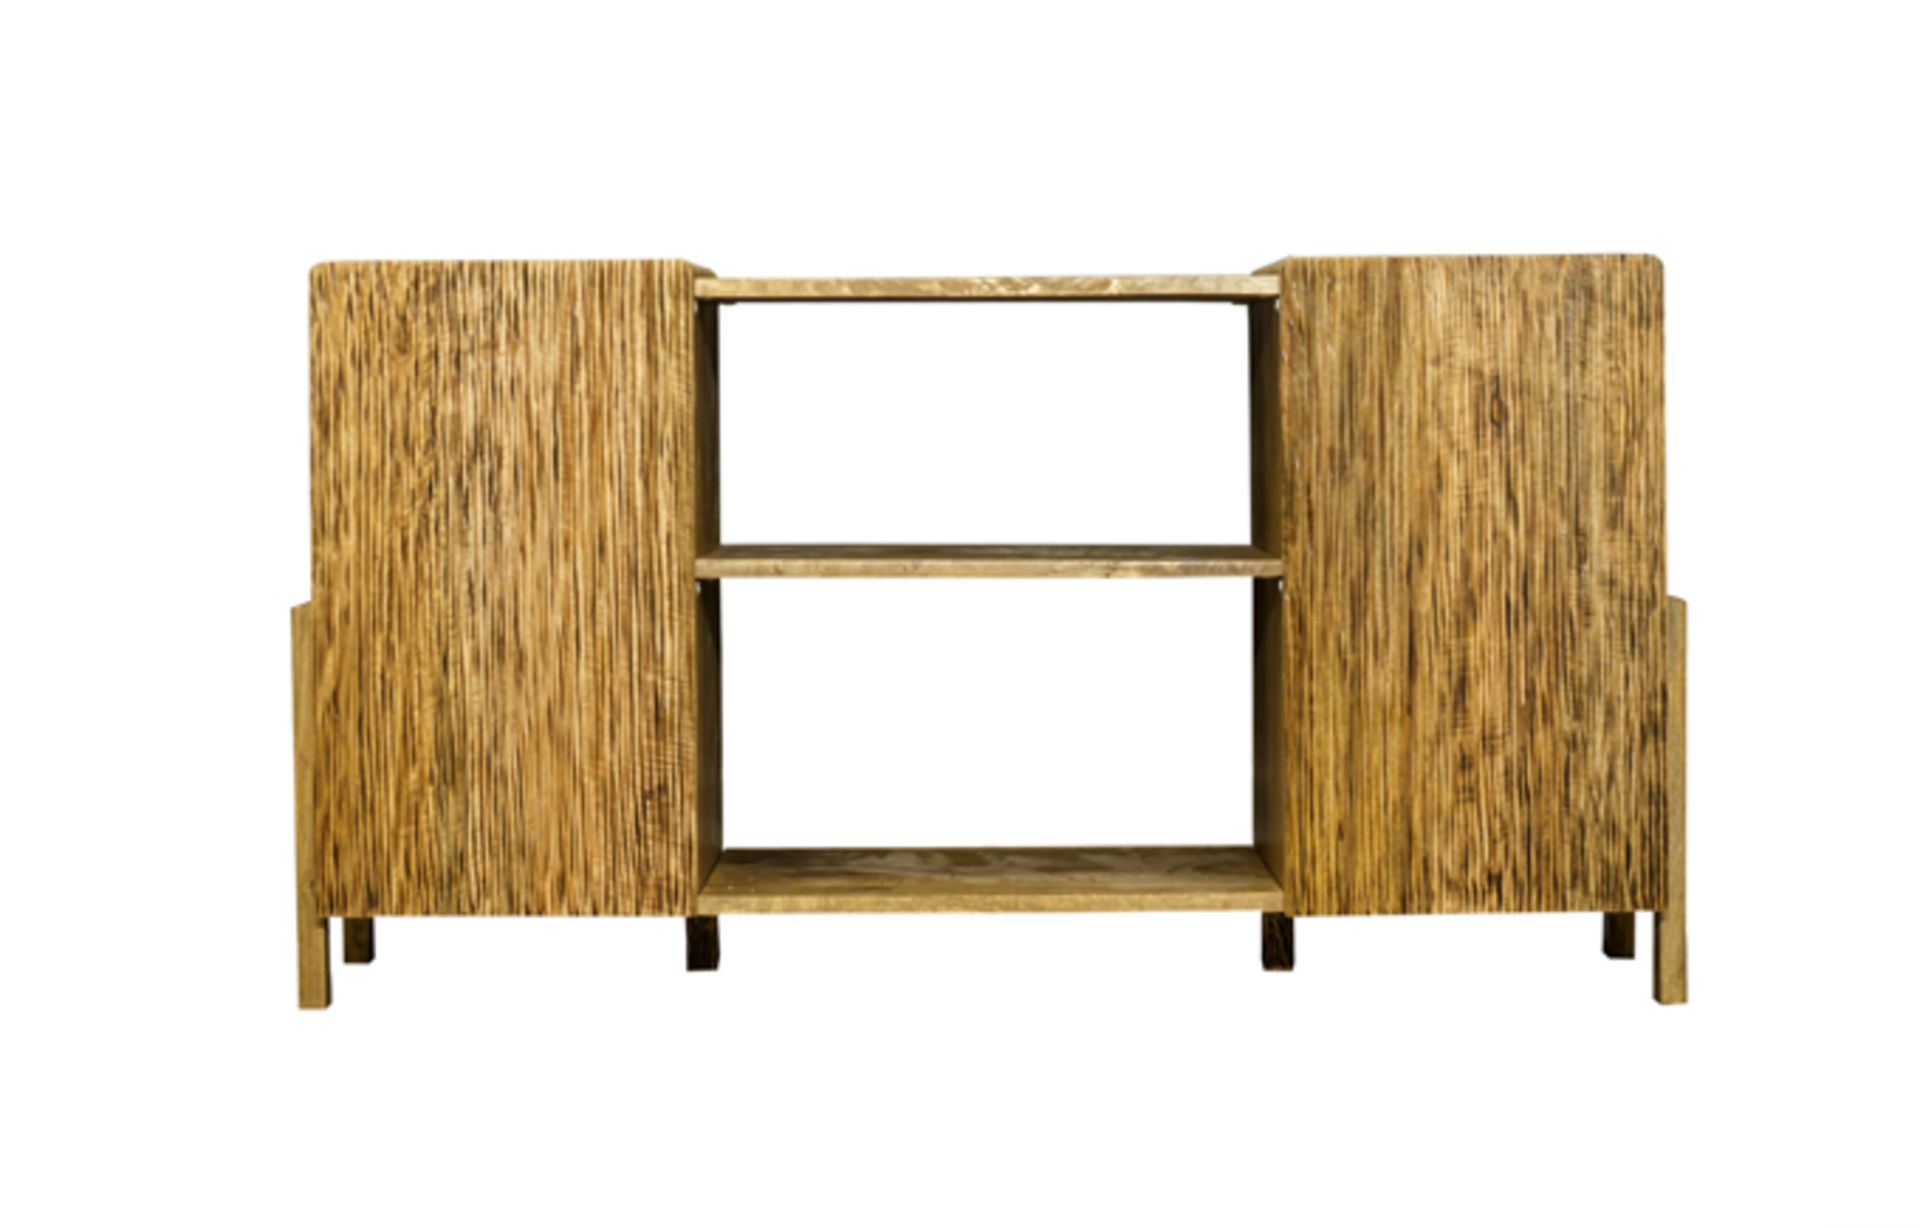 Ripple Sideboard The Ripple Range Brings Wonderfully Unique Character To Any Room With Its Exotic - Image 2 of 6